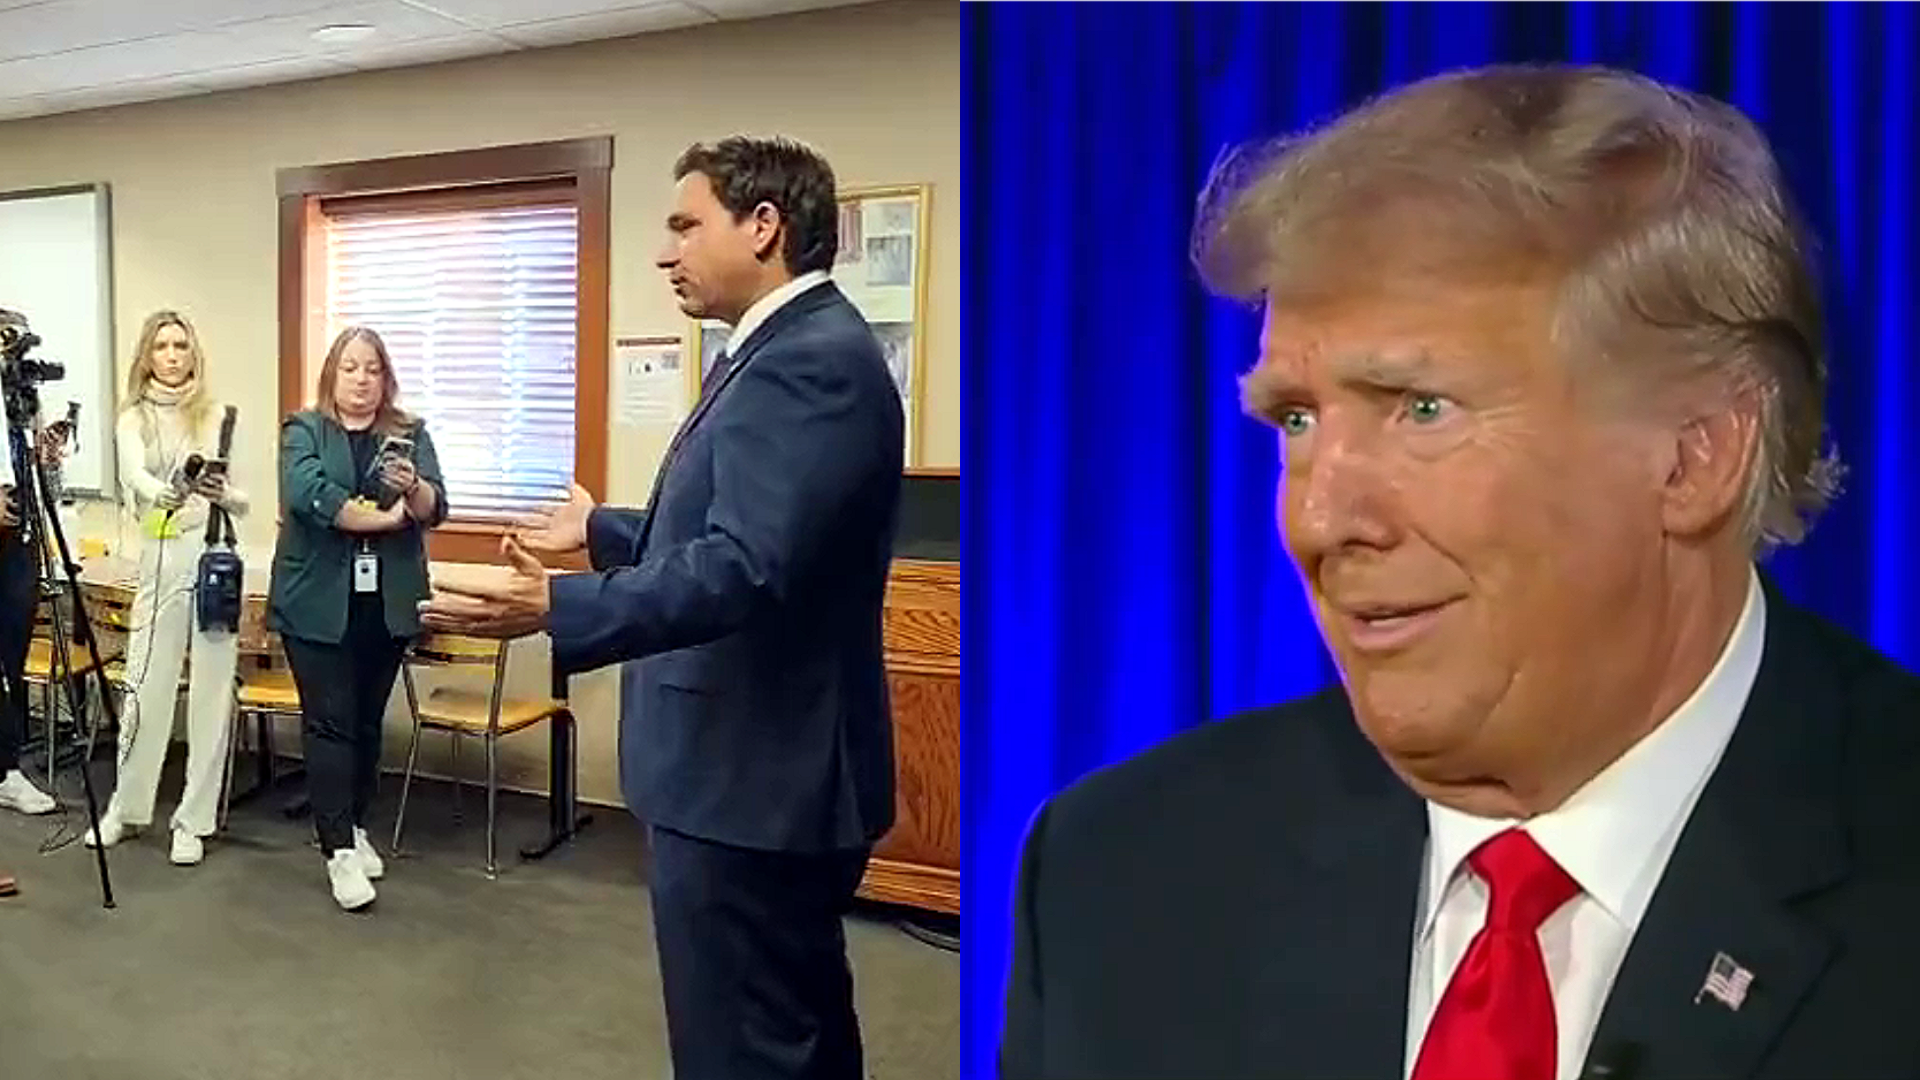 'Sad To See!' Trump Gets Flayed By Rival DeSantis Over Gaffes 'Every Time He Gets Off Teleprompter'